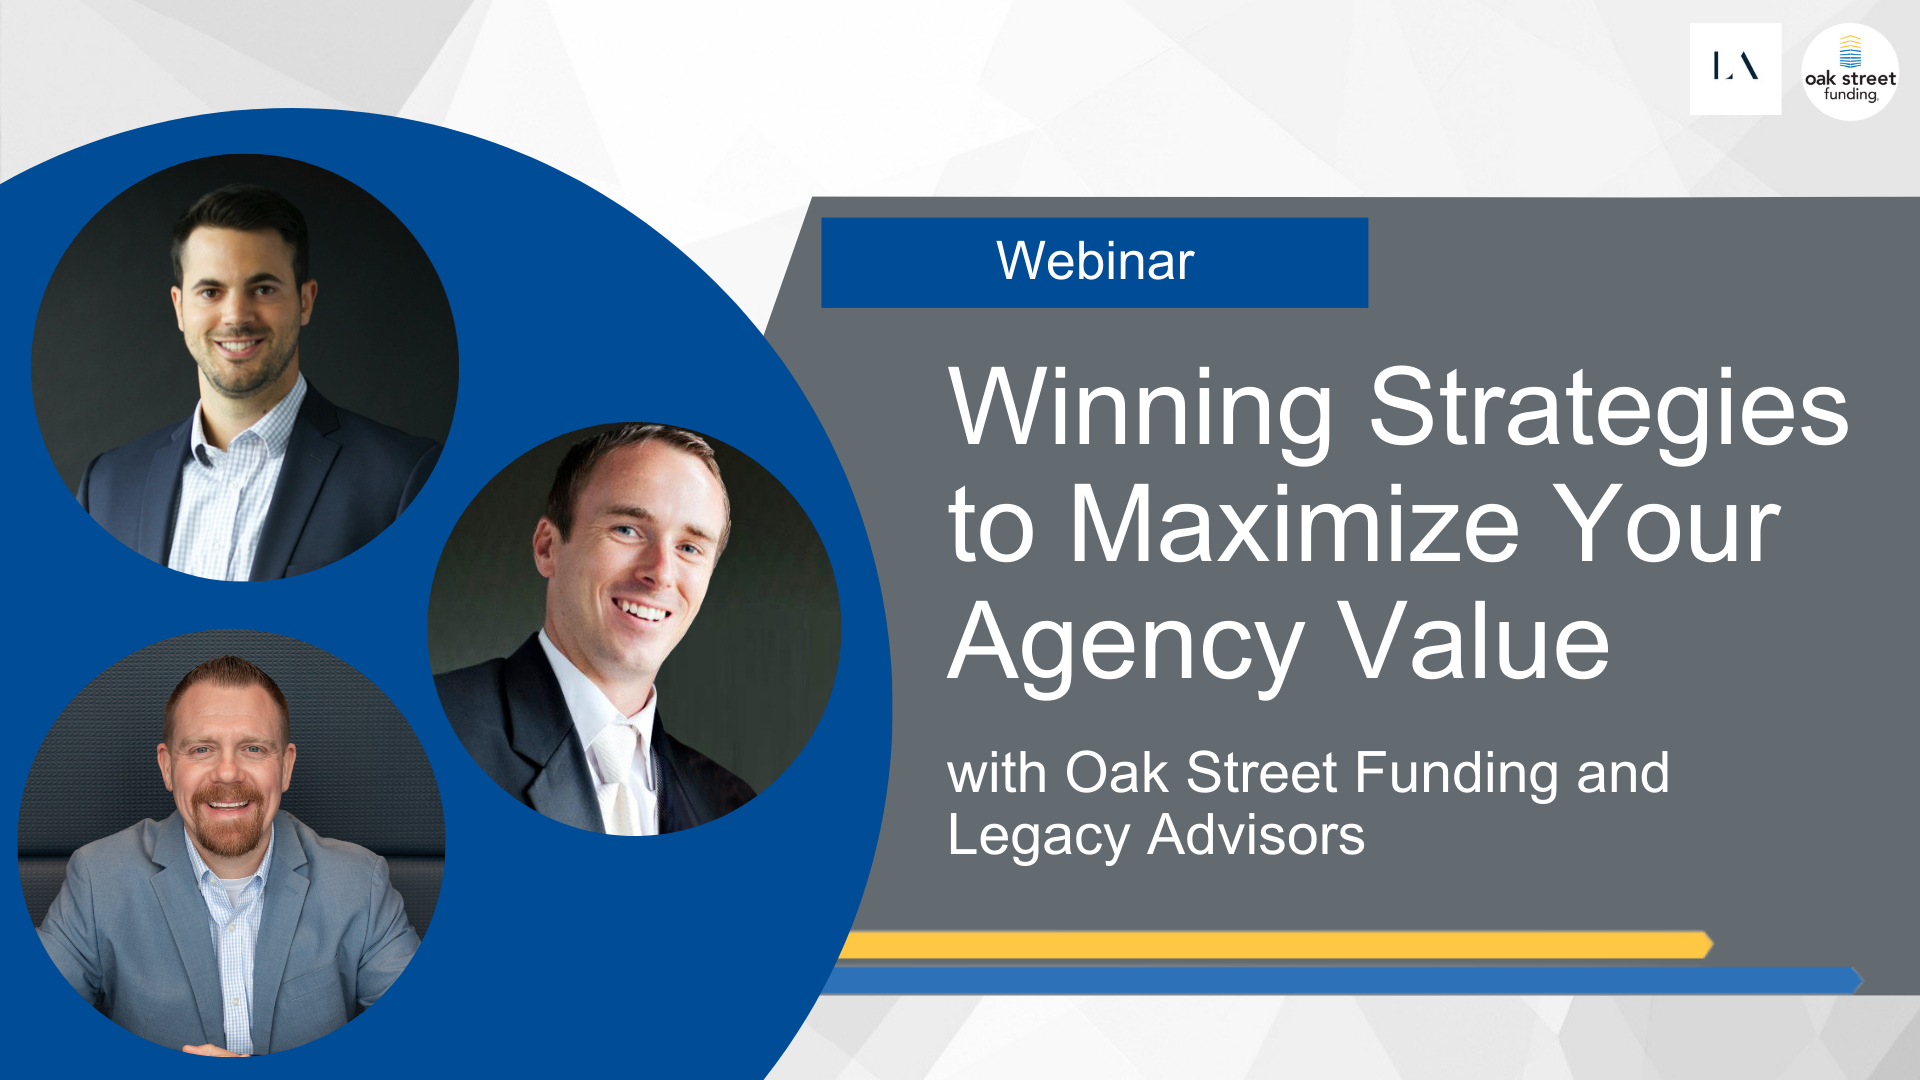 Winning Strategies to Maximize Your Agency Value with Legacy Advisors